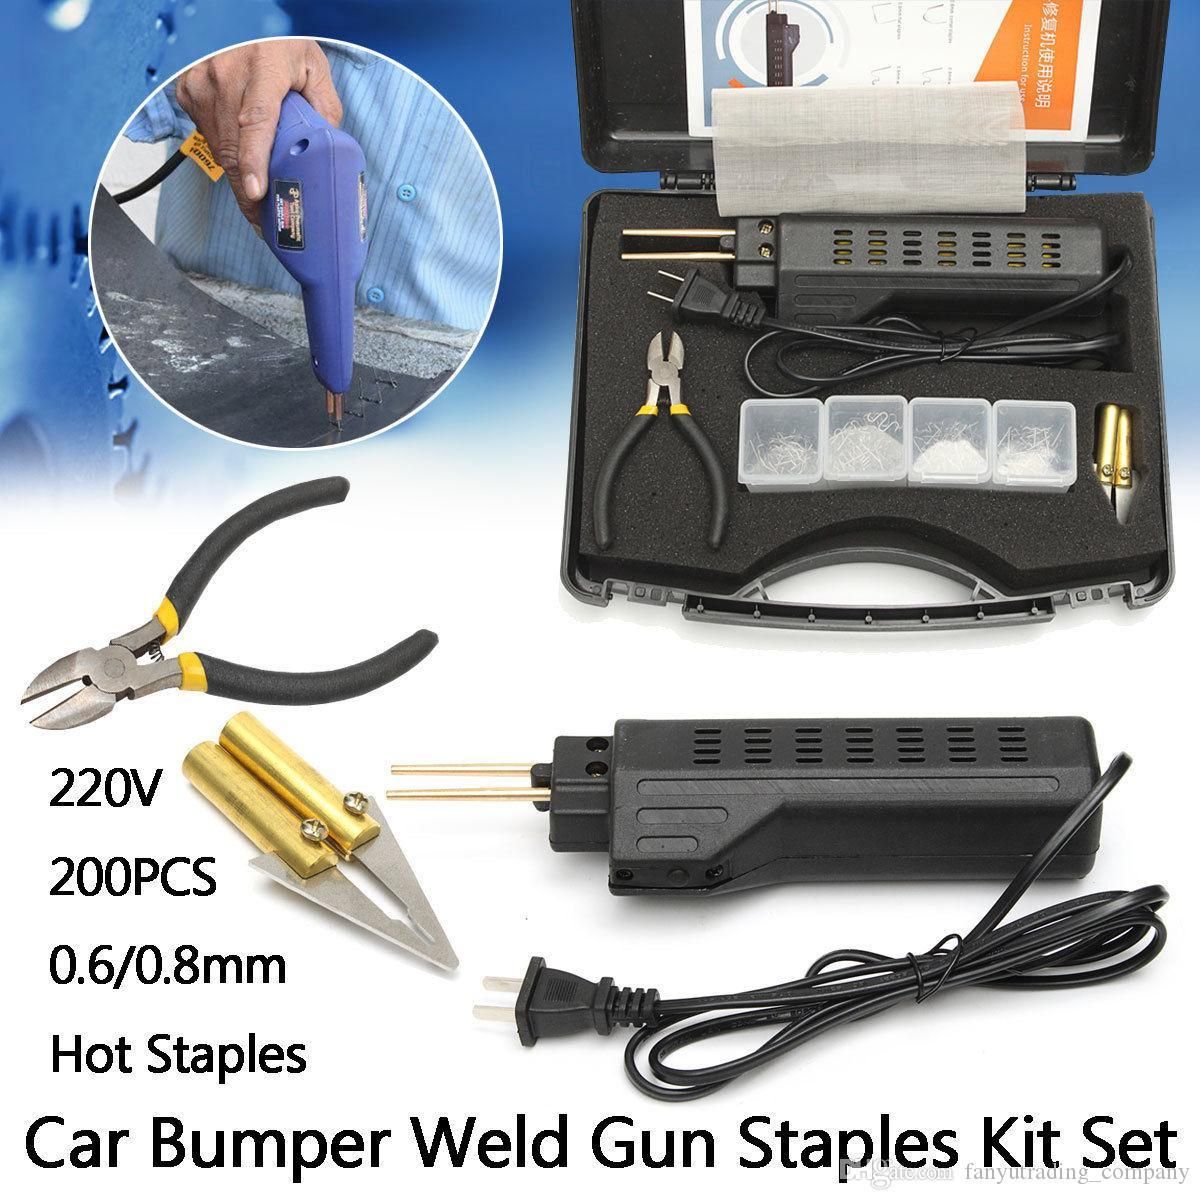 Professional Repair Welding Machine Set,Car Bumper Crack Repair Welding Machine Set,for Repairing and Reinforcing All Automotive Plastic and Auto Body Dent Removal 